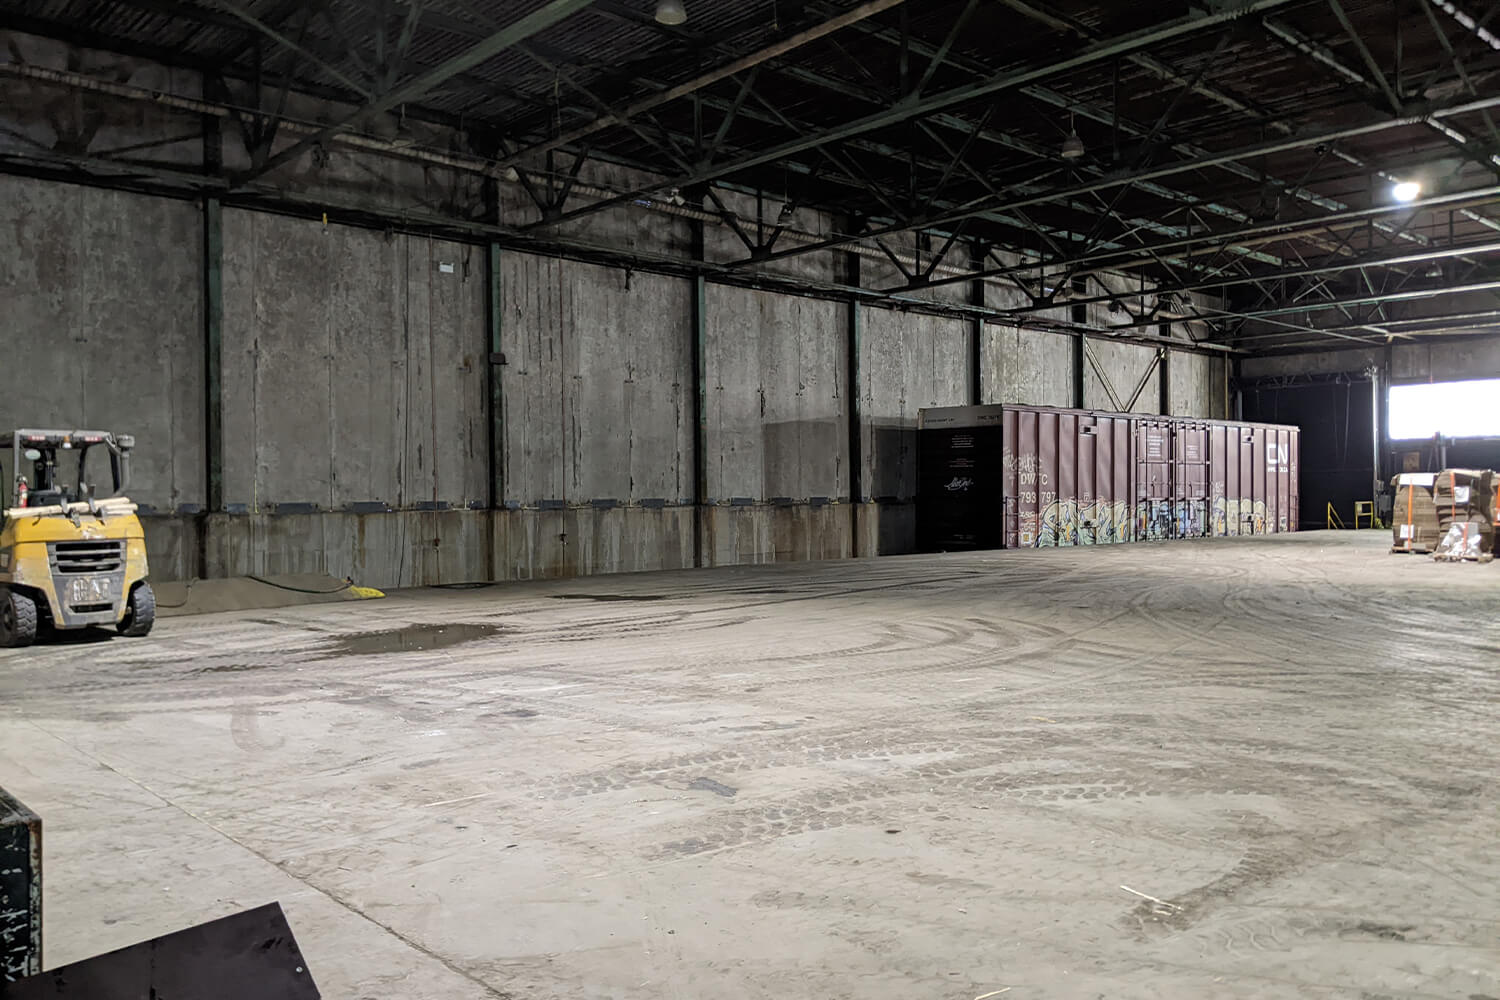 Available warehouse space